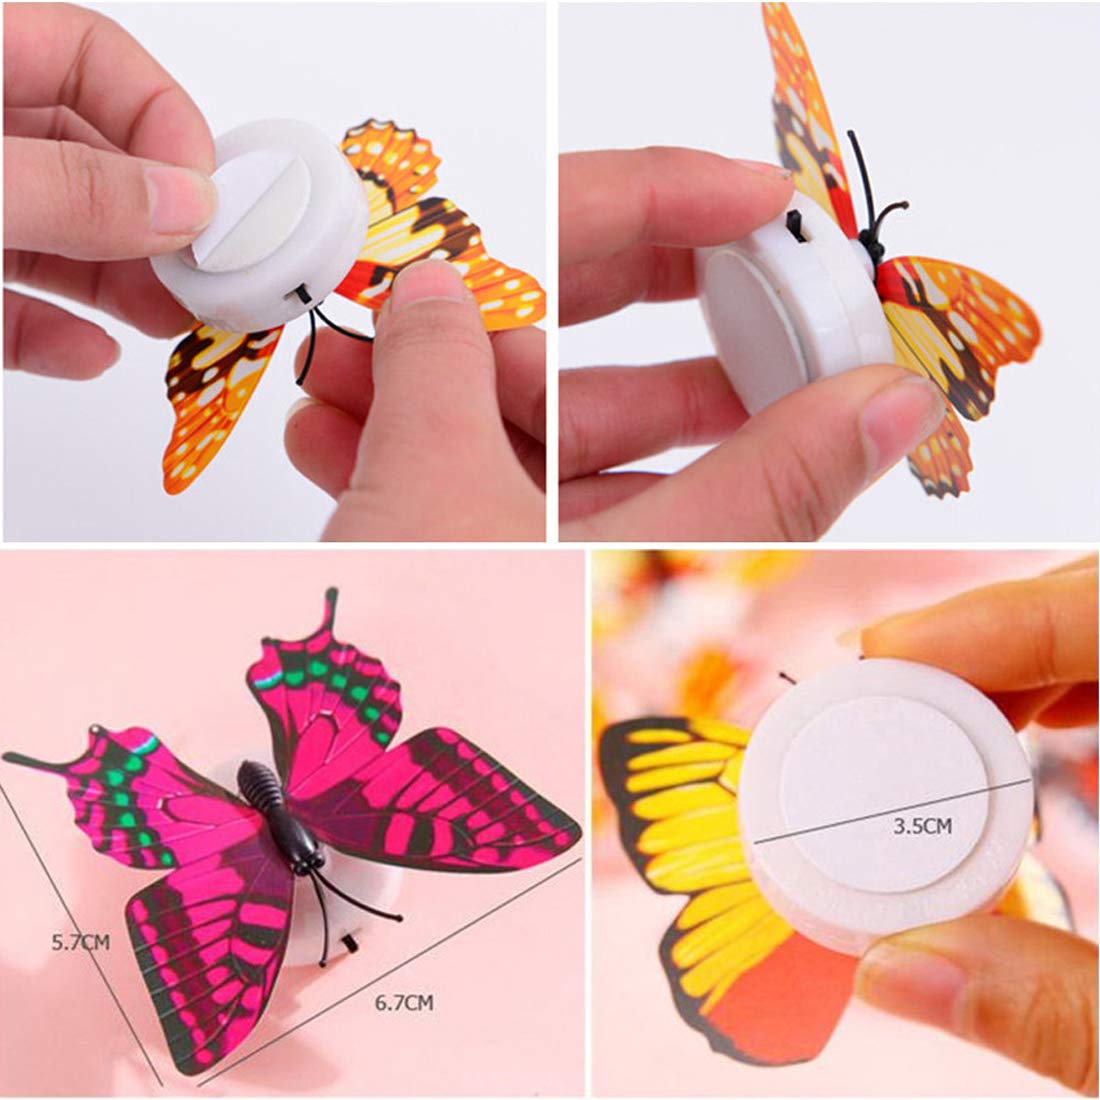 LED Plastic Night Lamp with Butterfly